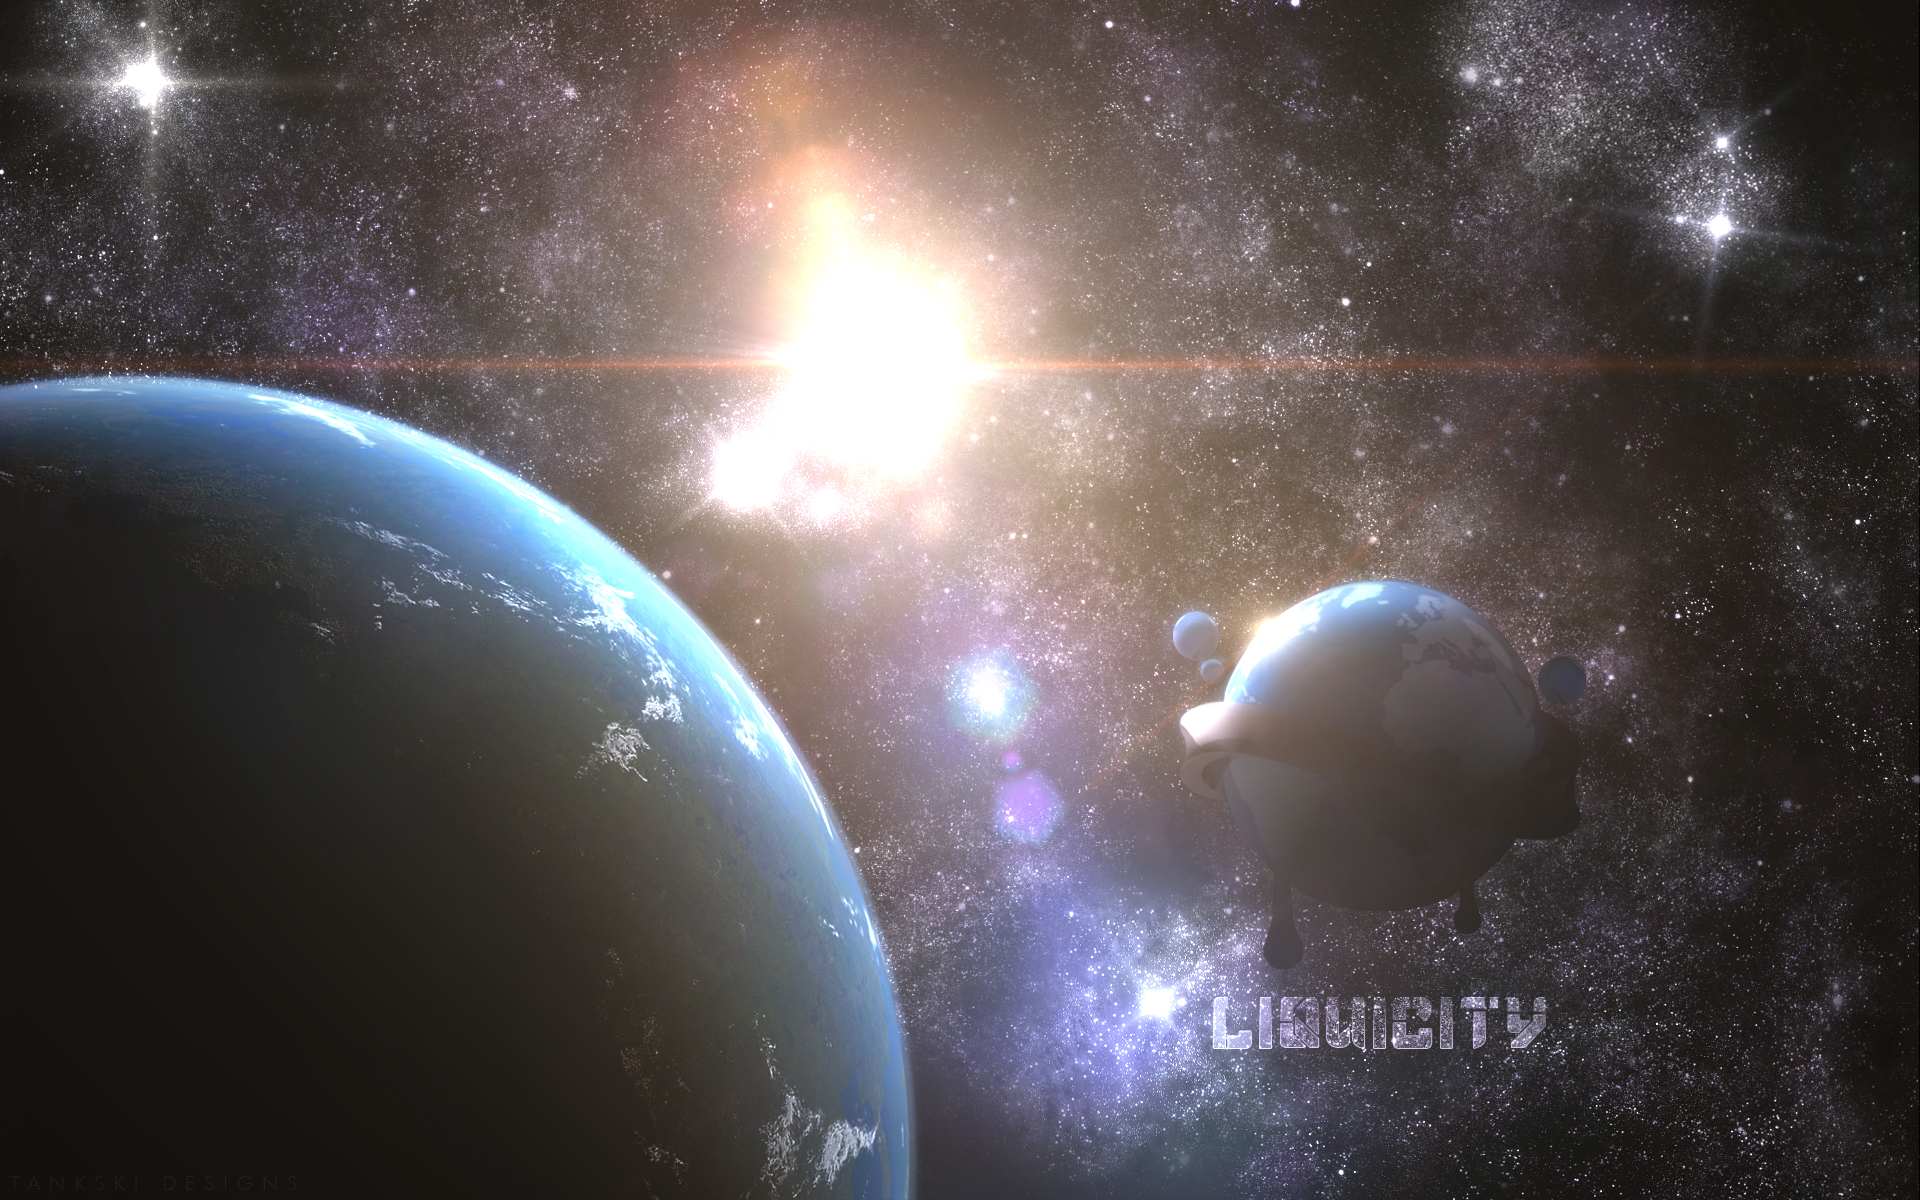 Liquicity In Space By Tankskides On Deviantart Images, Photos, Reviews